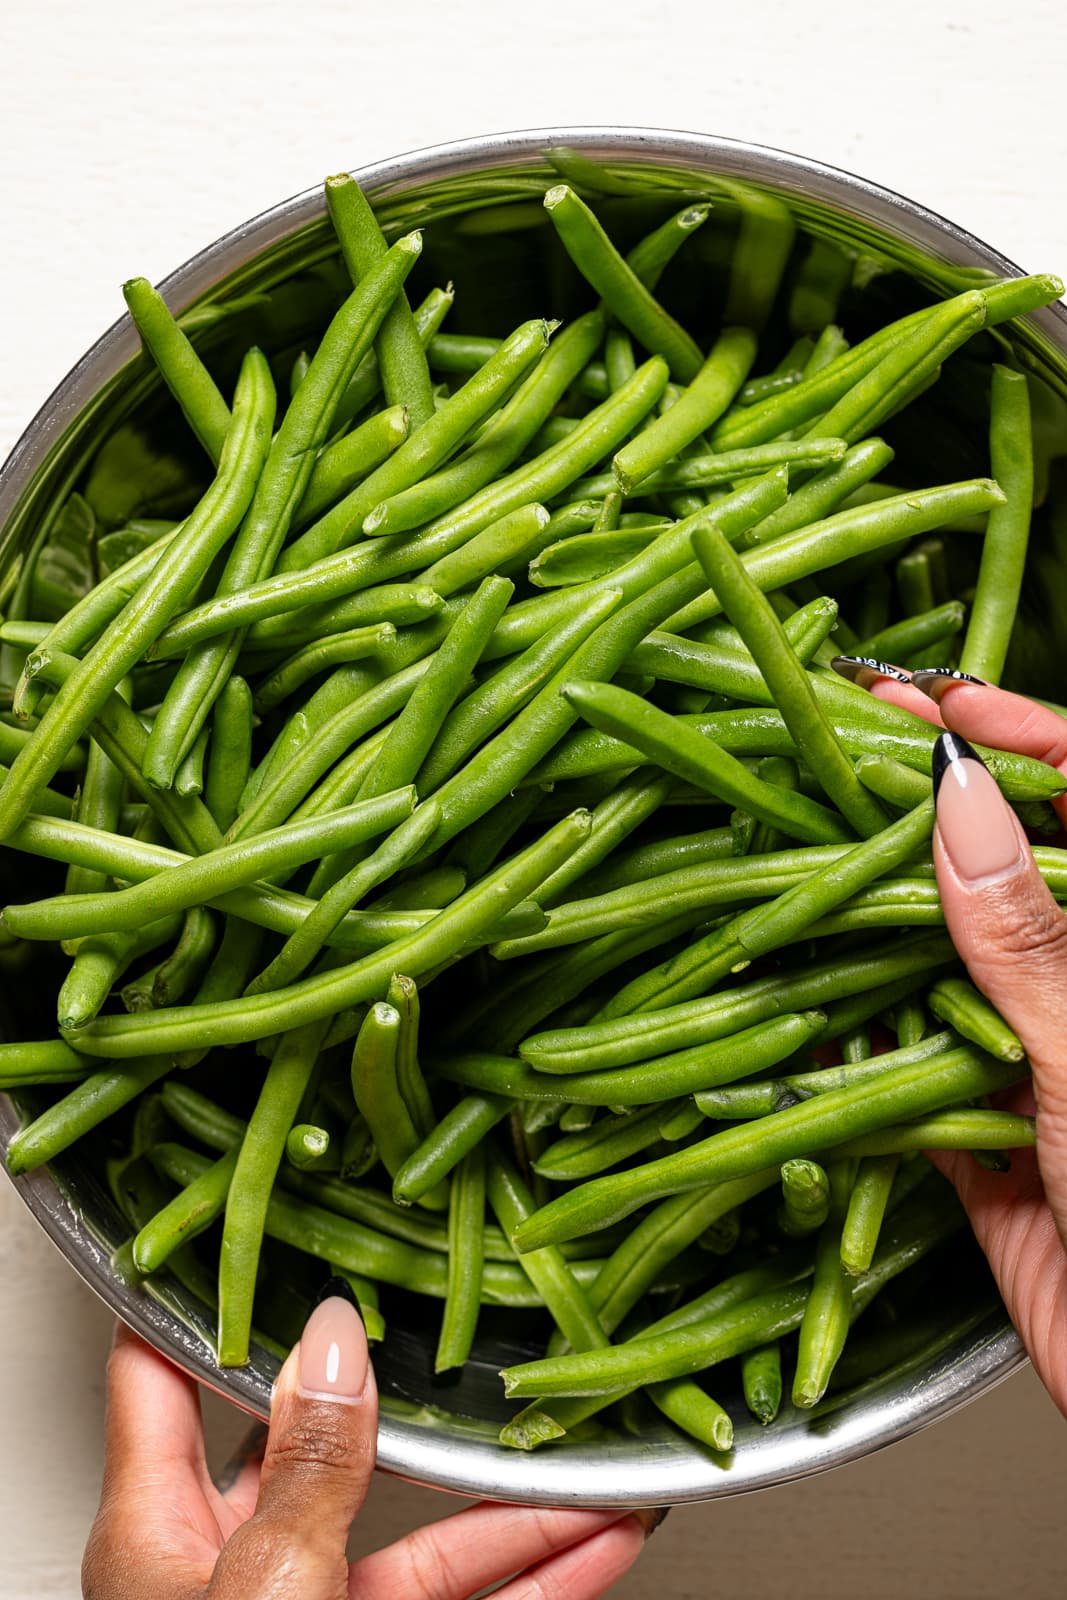 Green beans in a silver bowl.